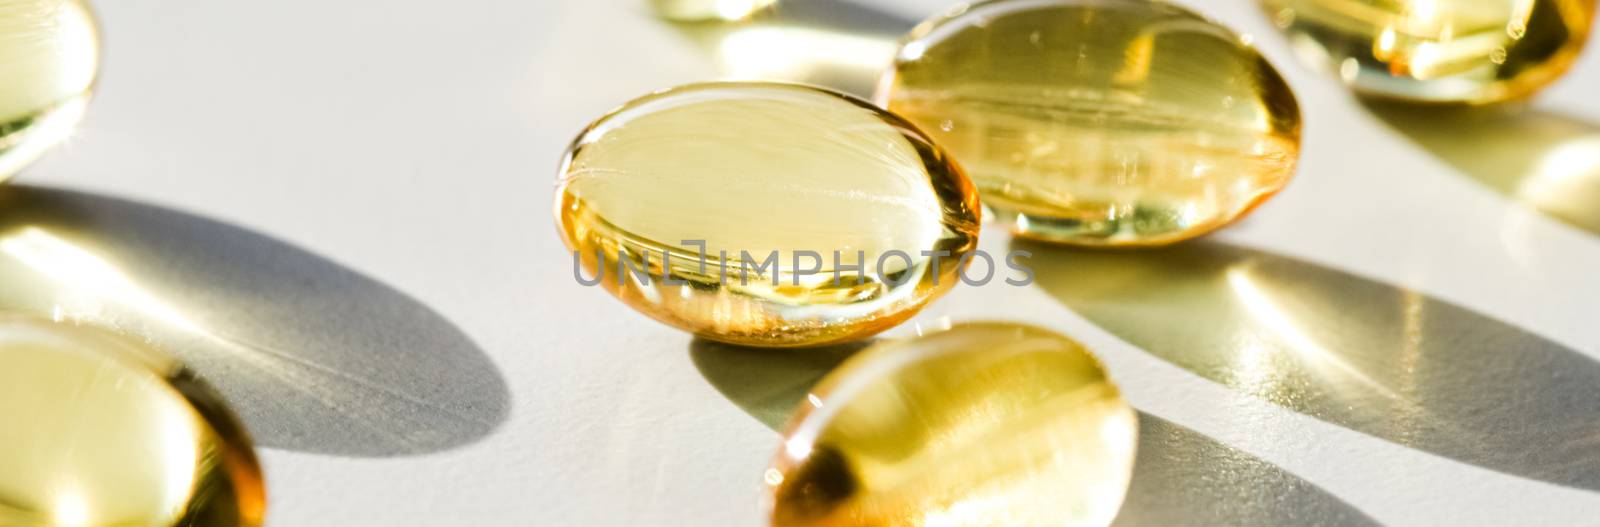 Omega 3 fish oil capsules for healthy diet nutrition, pharma brand store, probiotic drug pills as healthcare or supplement products for pharmaceutical industry ads